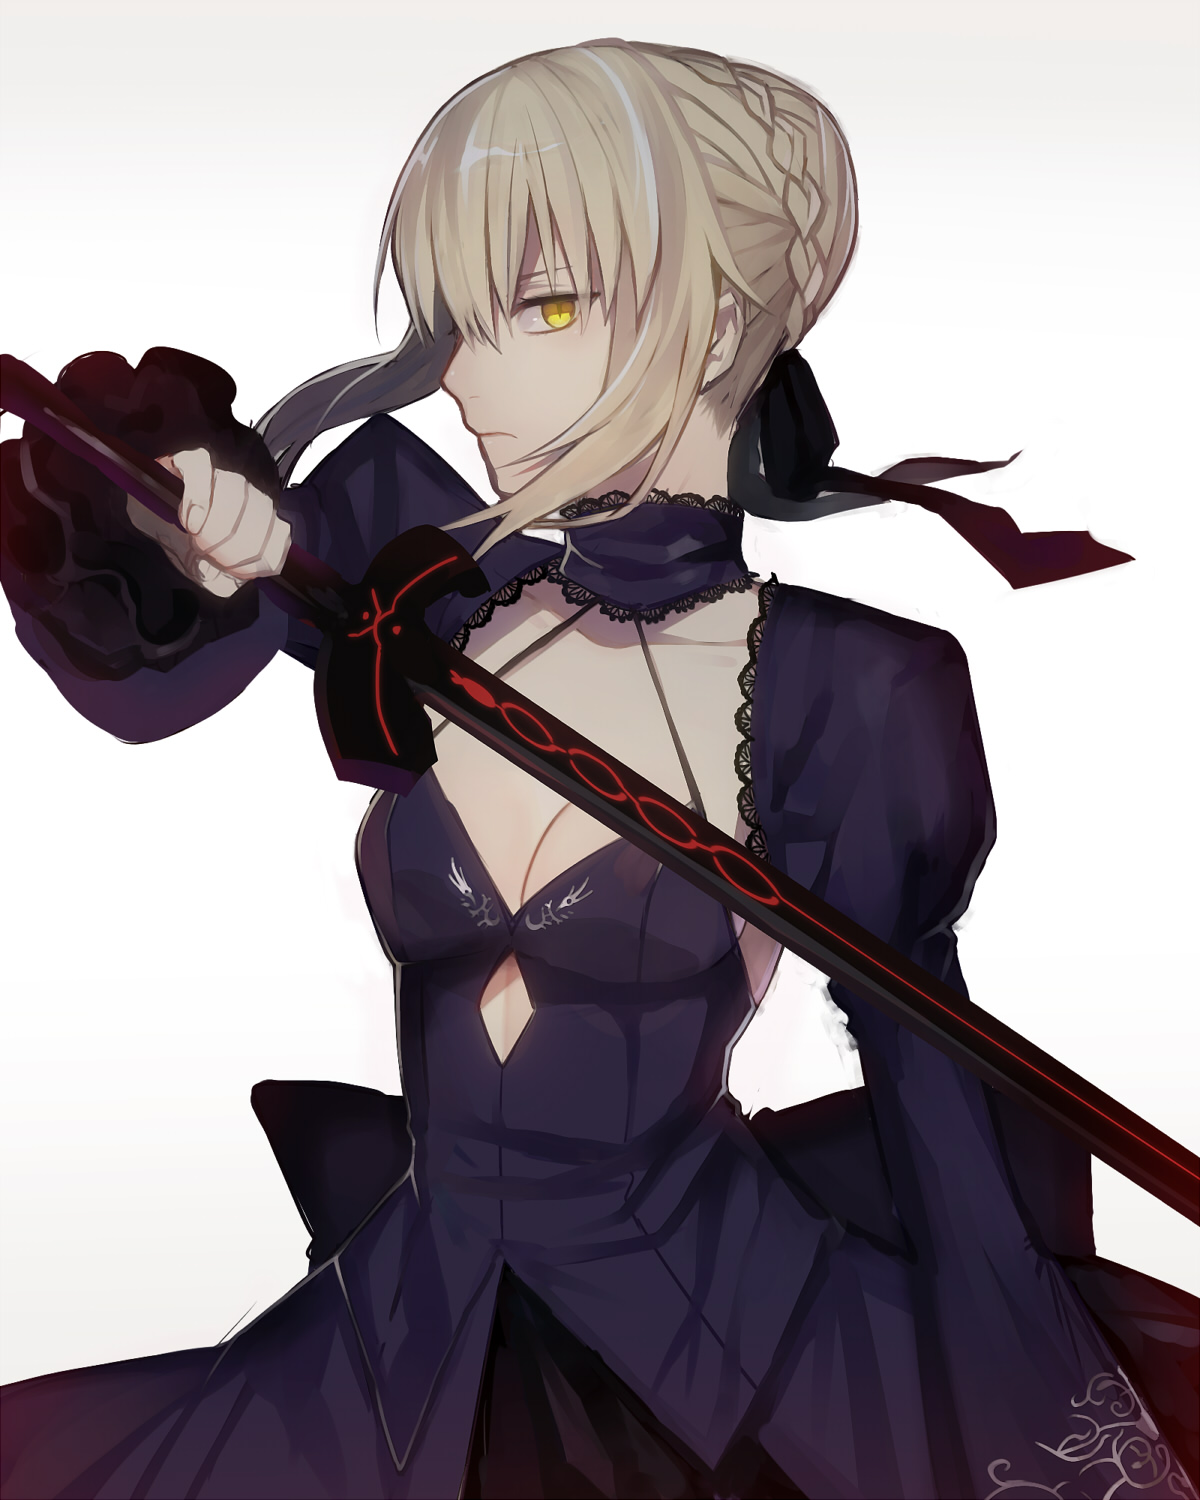 Anime 1200x1500 Fate series Fate/Grand Order Fate/Stay Night fate/stay night: heaven's feel anime girls portrait display 2D digital art fan art simple background black dress fantasy weapon yellow eyes small boobs long hair Saber Alter cleavage Artoria Pendragon